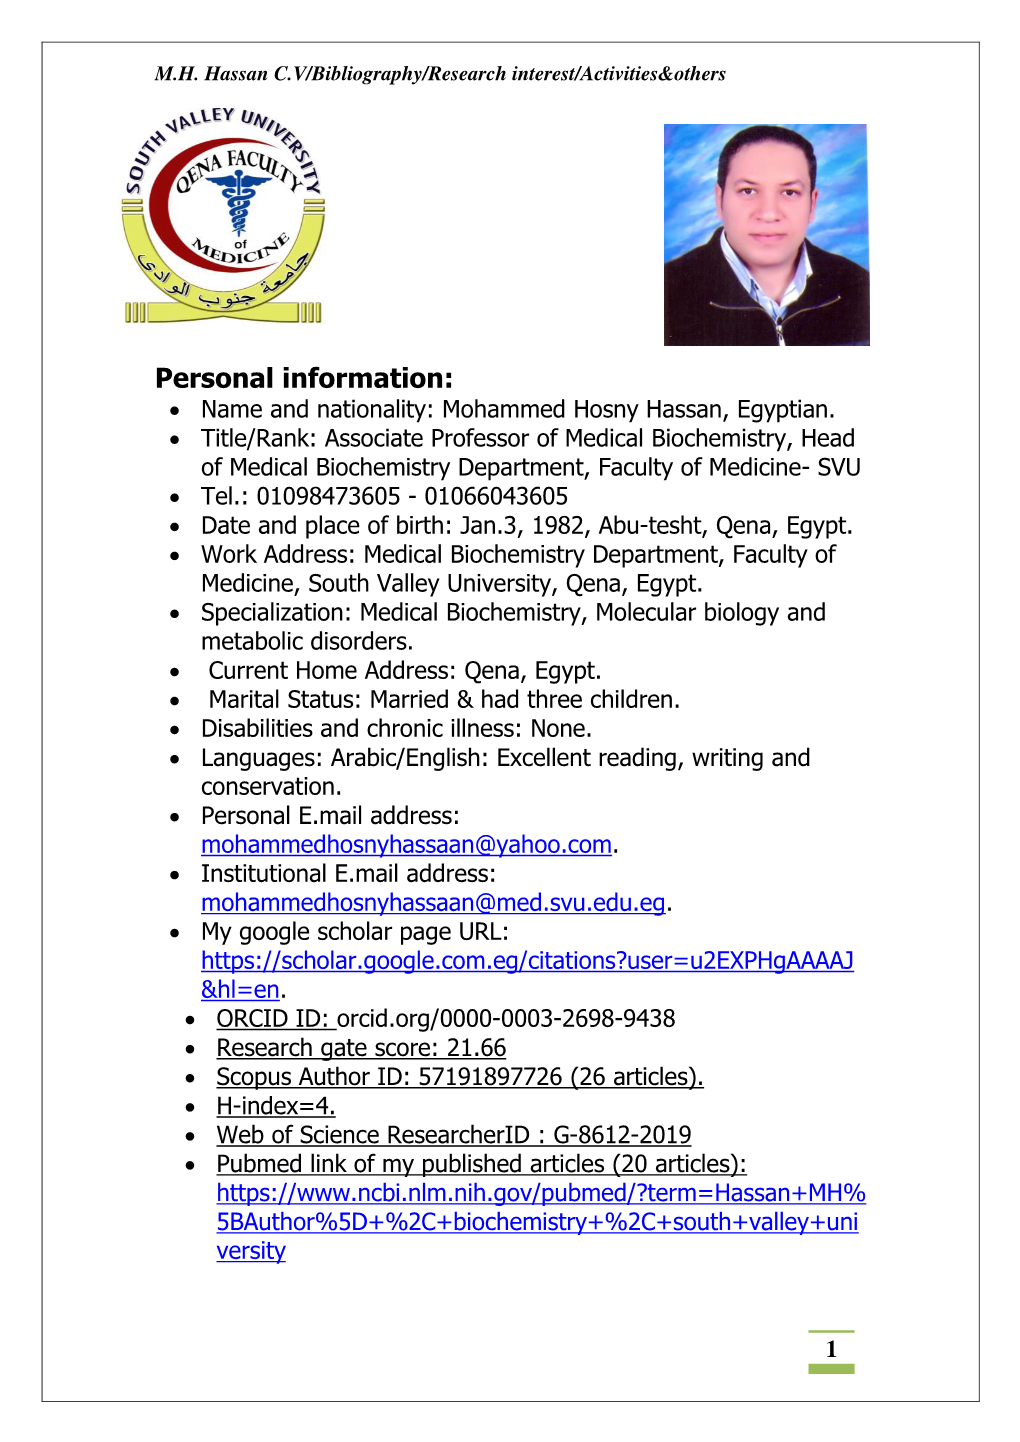 MH Hassan CV/Bibliography/Research Interest/Activities&Others